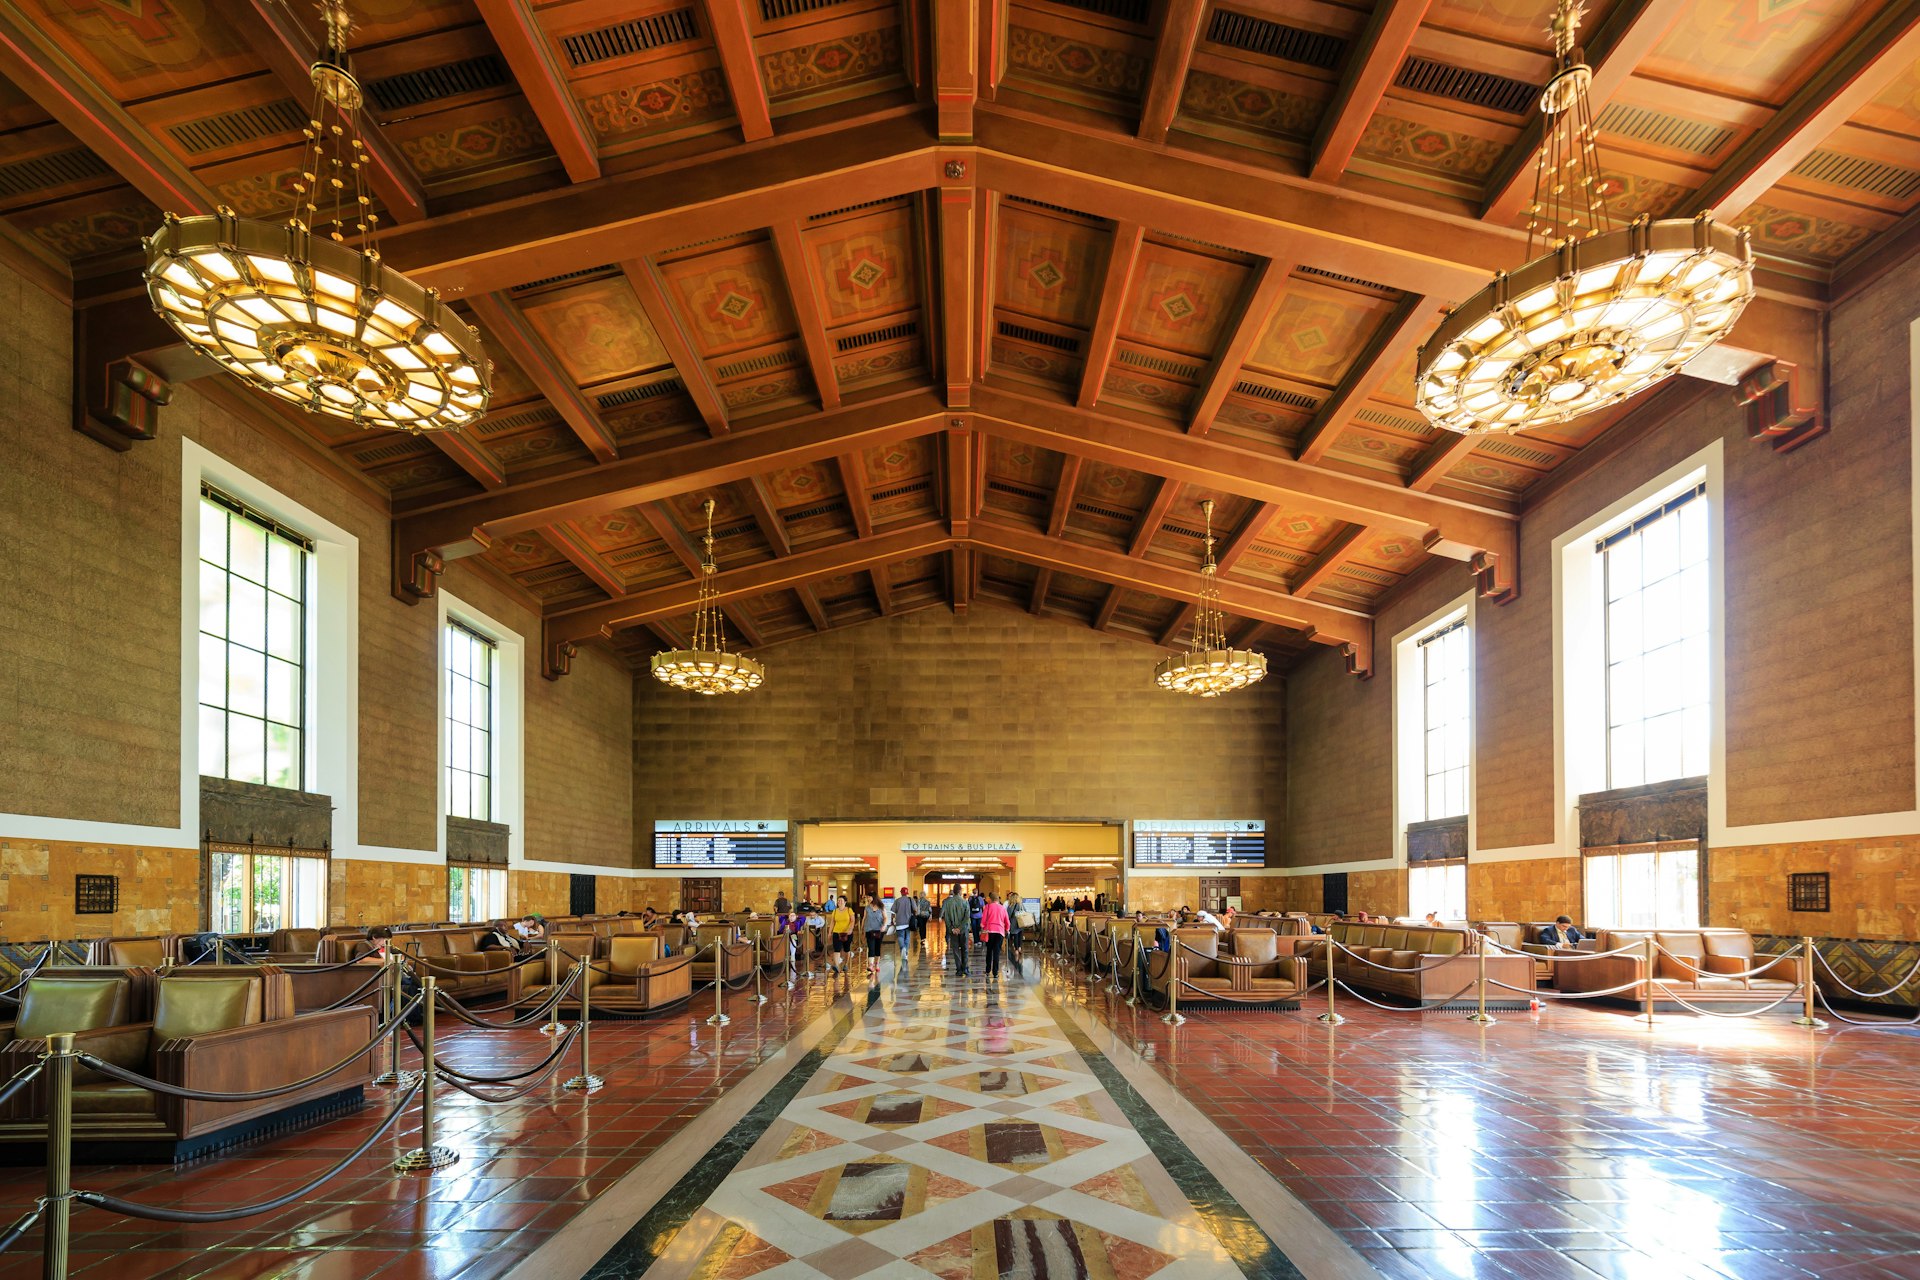 The art deco waiting room of historic Union Station in Los Angeles, California, USA